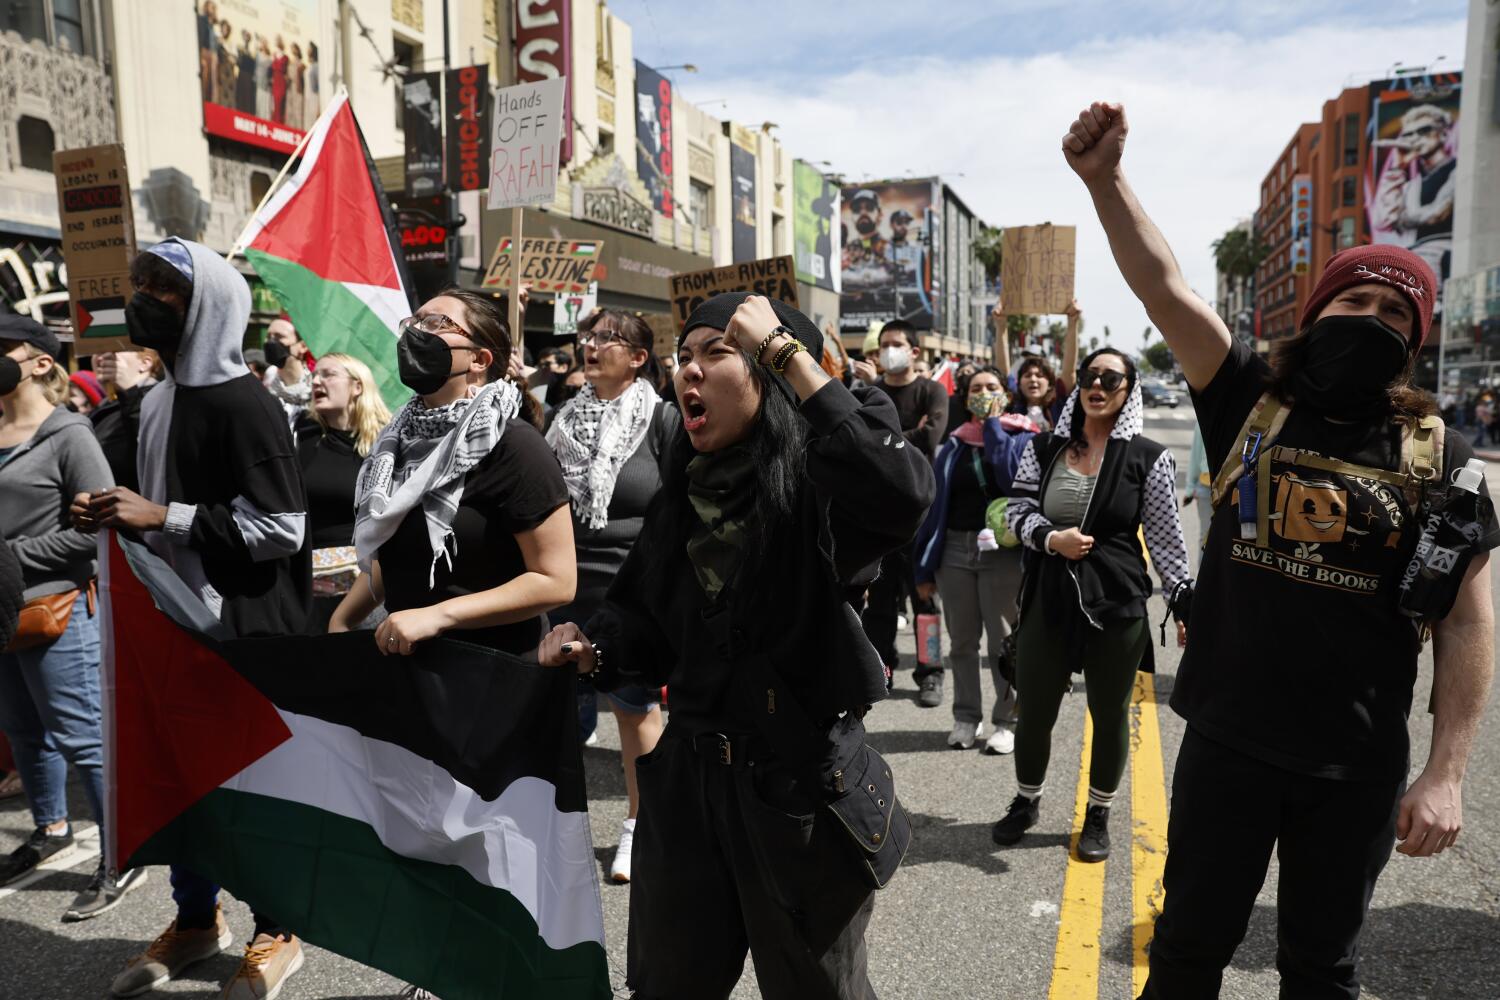 Roughly a thousand protesters rally in Hollywood ahead of Oscar ceremony calling for a cease-fire in Gaza